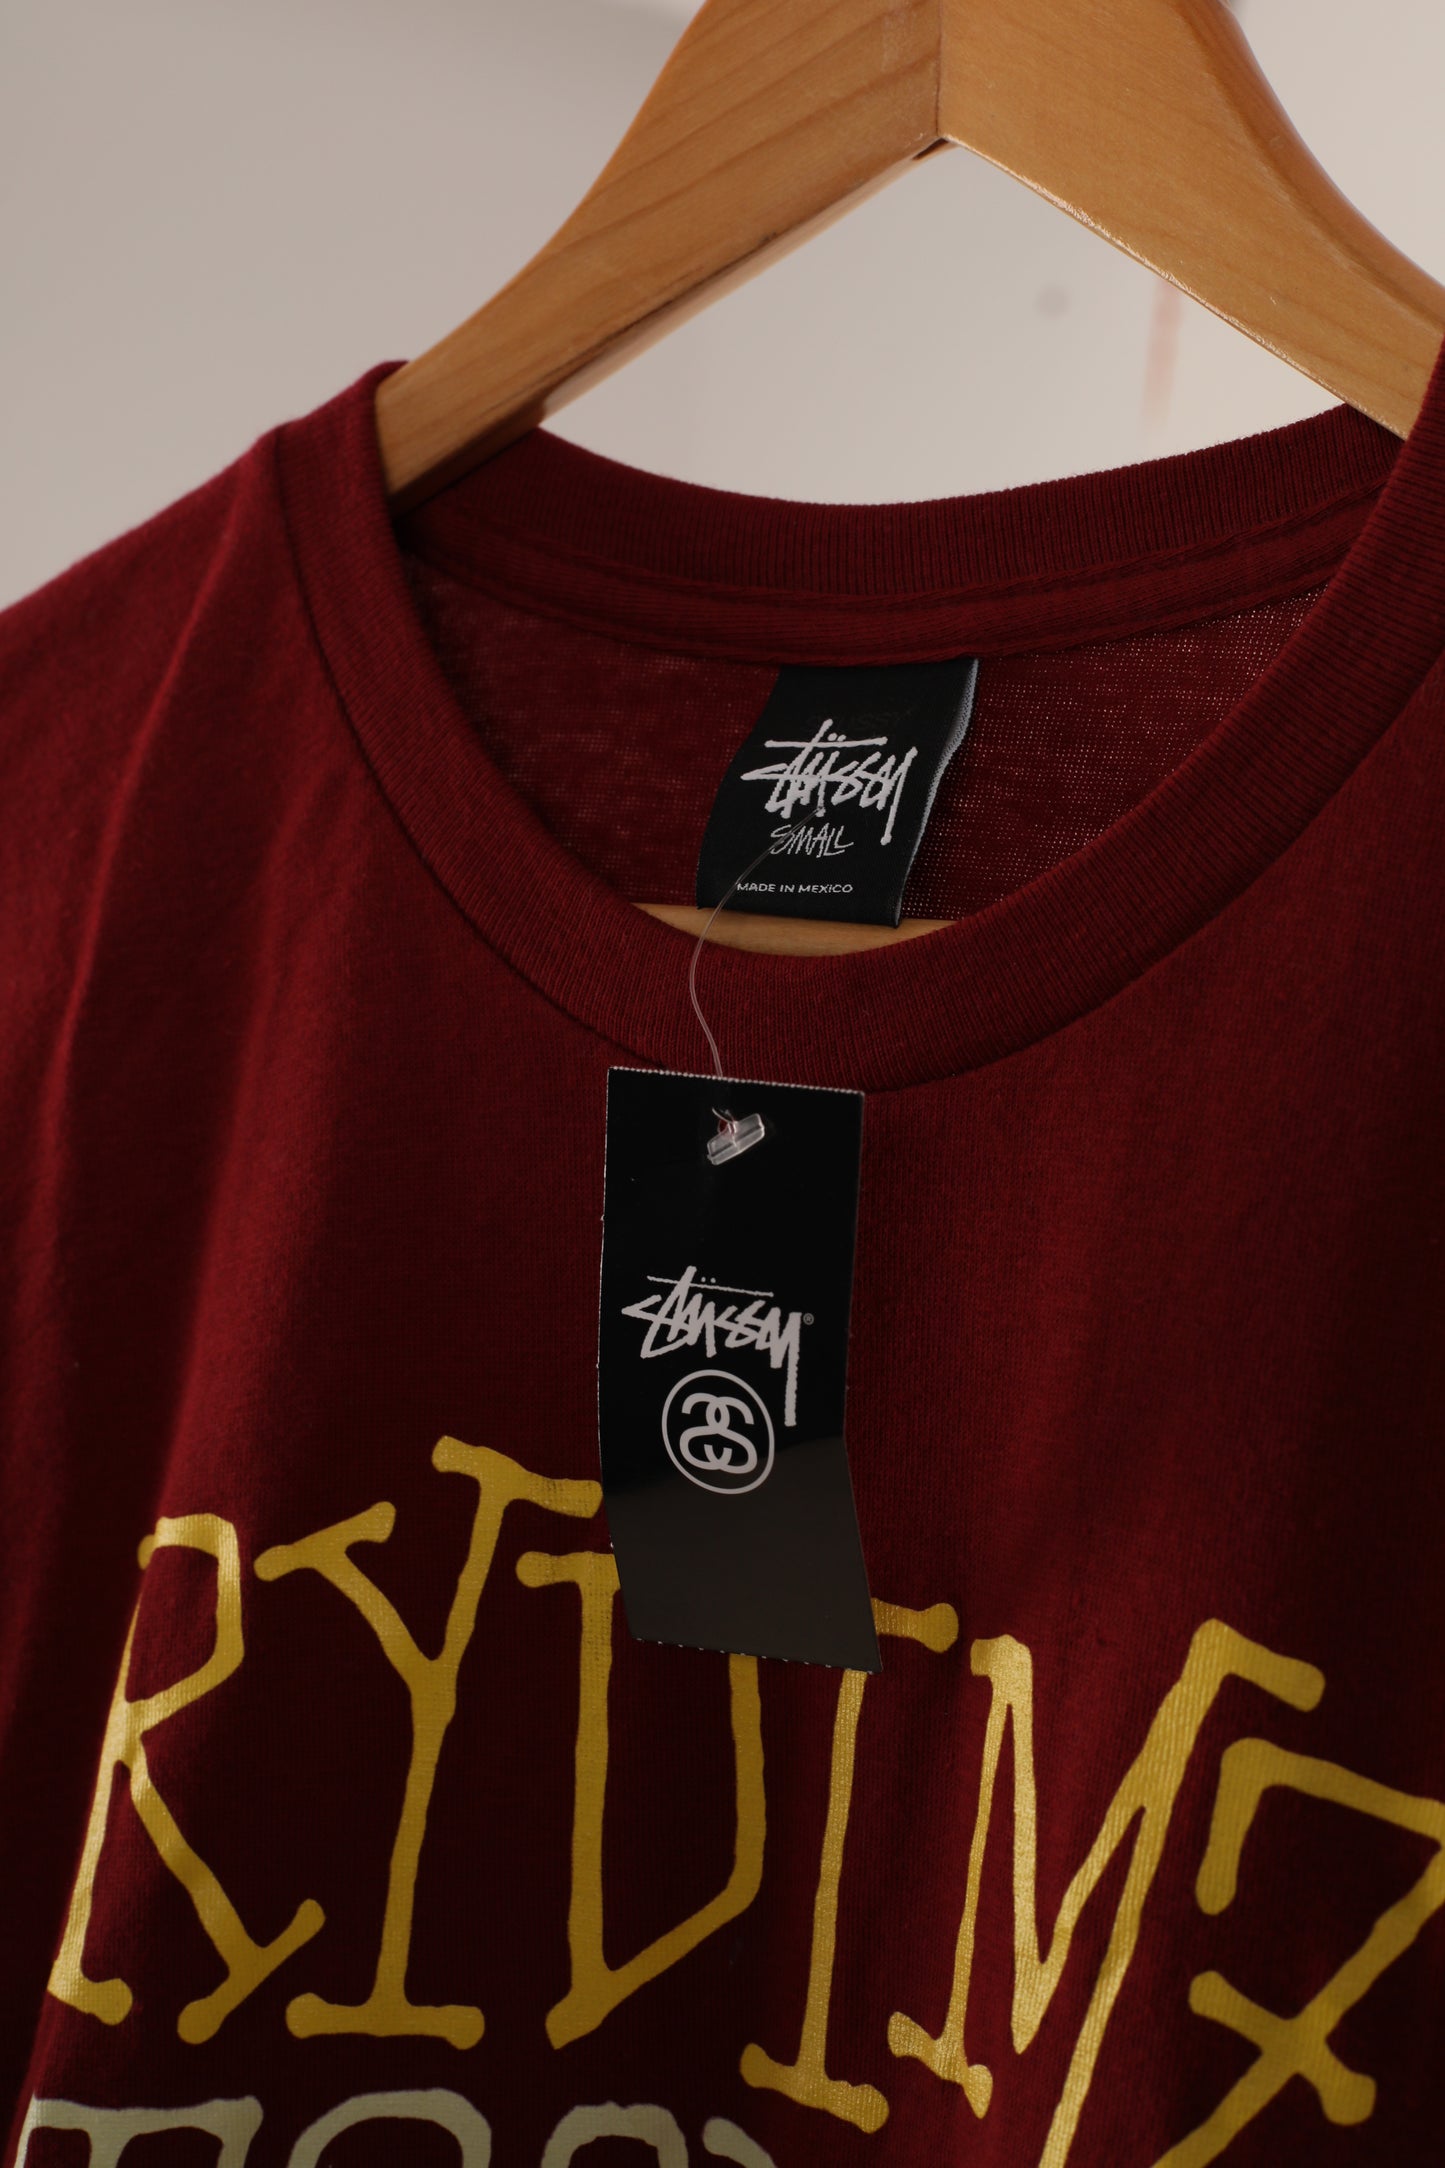 Deadstock Stussy Rydimz to spare tee - Maroon (S)